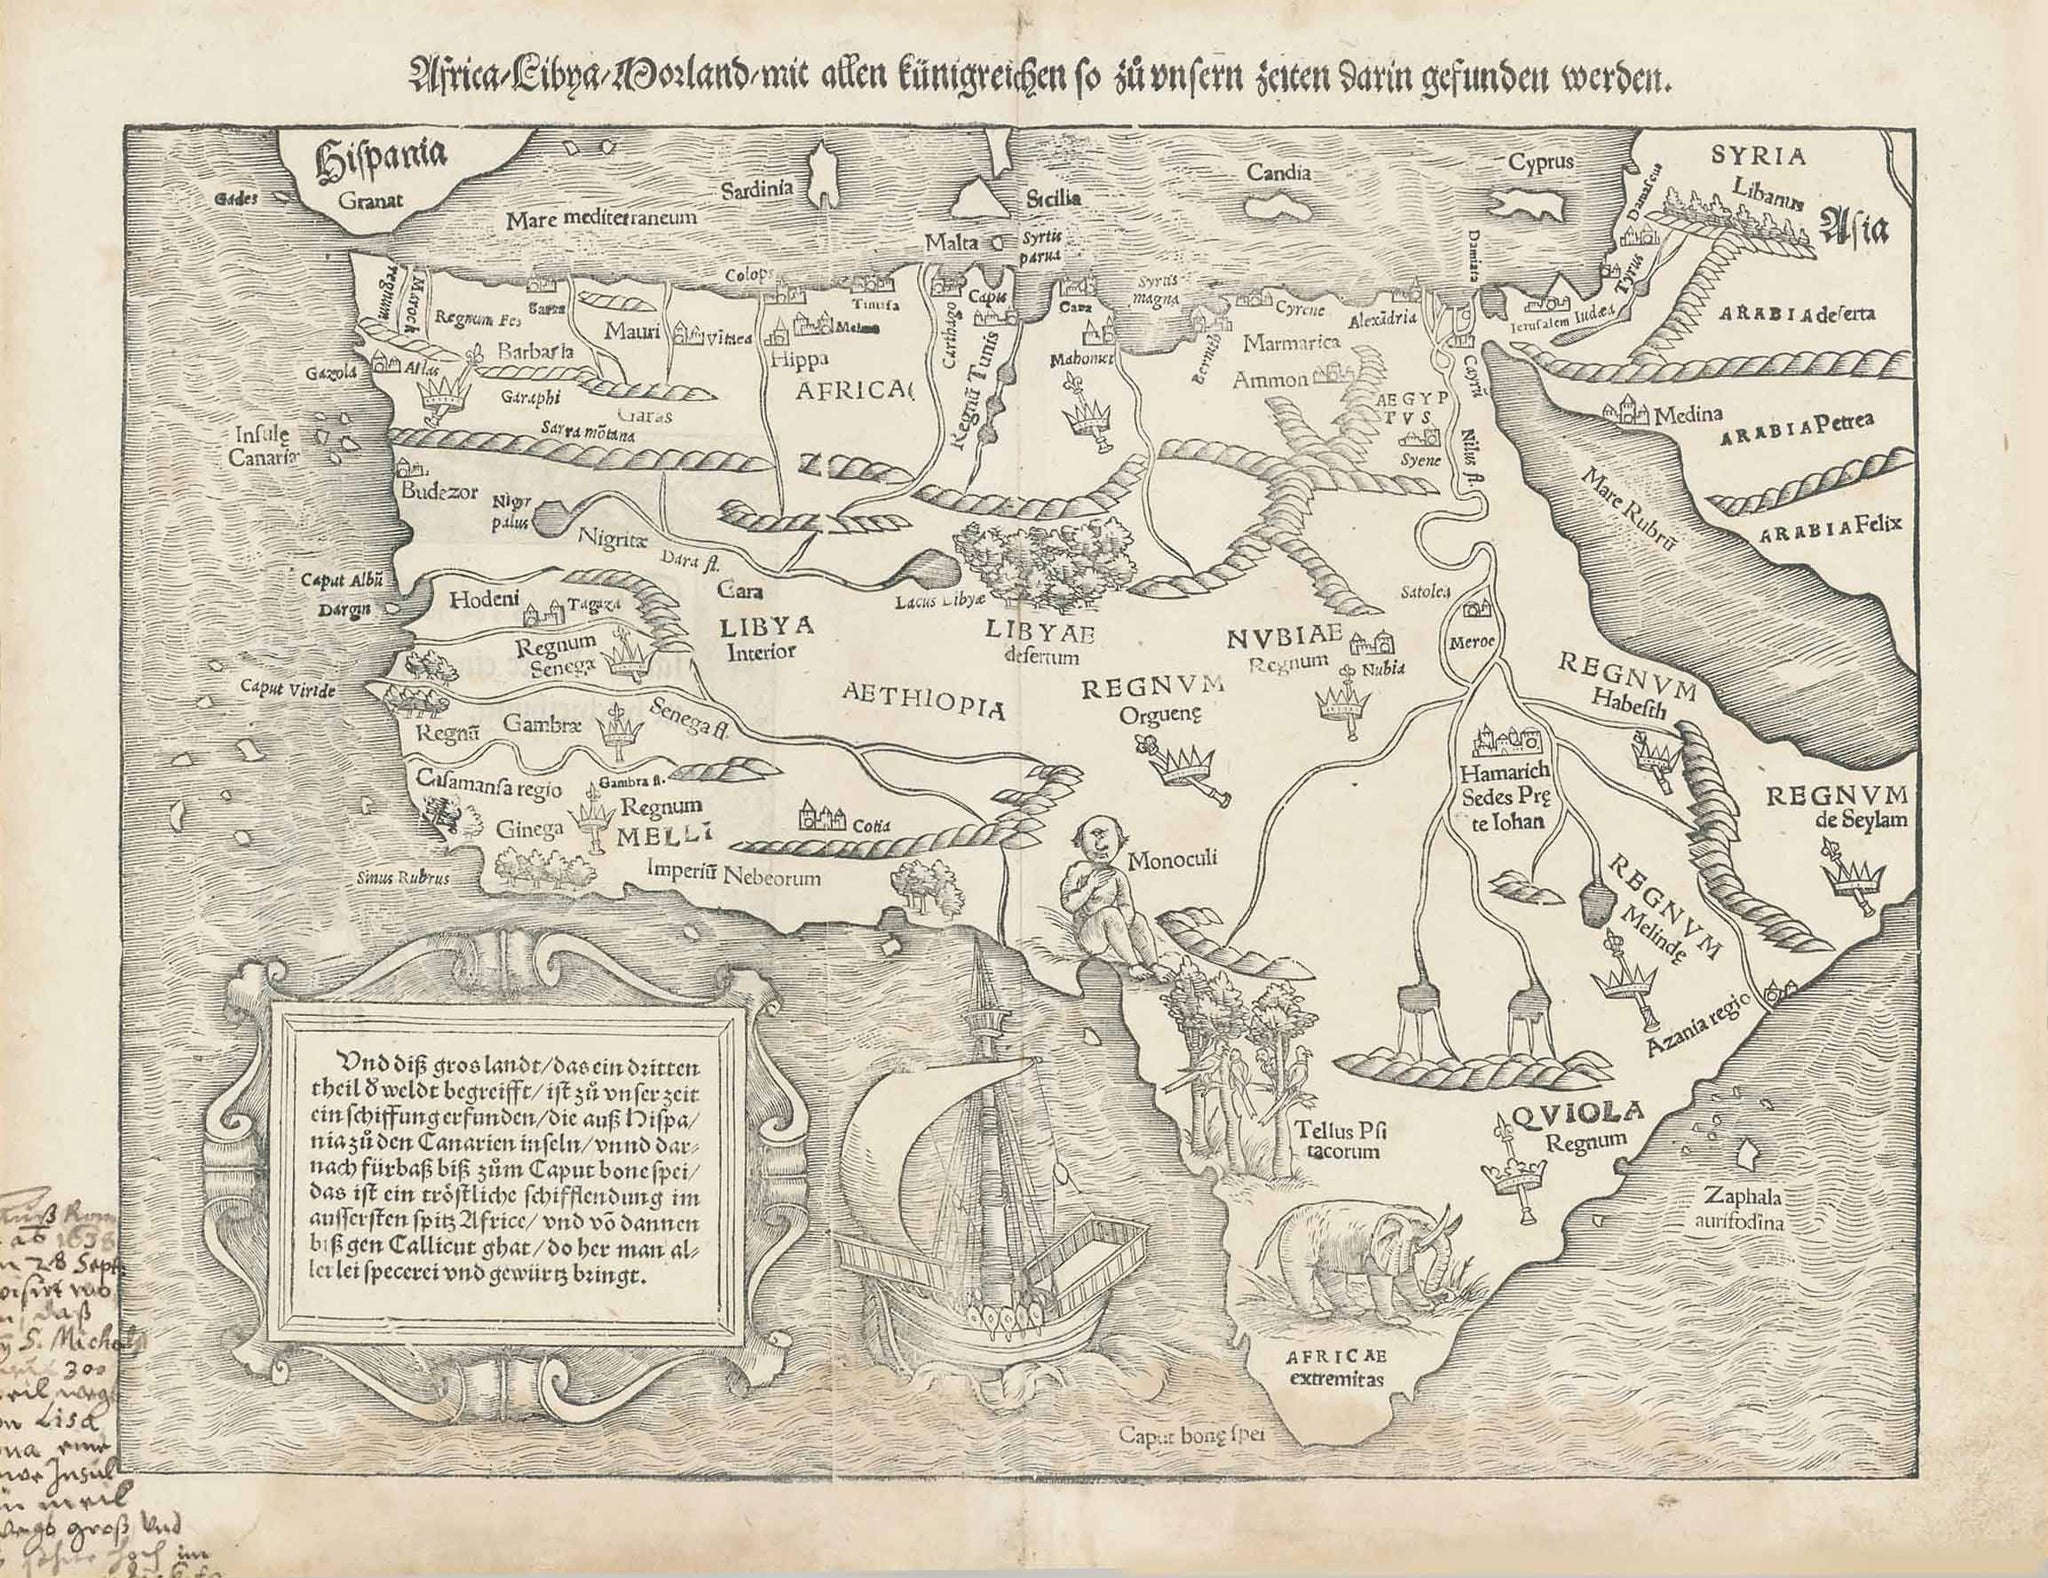 "Africa / Libya / Vorland / mit allen künigreichen so zu unsern zeiten darin gefunden werden"  Woodcut. Published in "Cosmographia" by Sebastian Muenster (1488-1552) German edition.   Basel, 1553  For a 30% discount enter MAPS30 at chekout  A fascinating early map of Africa, the charm of which is the geographical fumbling for facts. This map belongs to the treasure maps of the African continent.